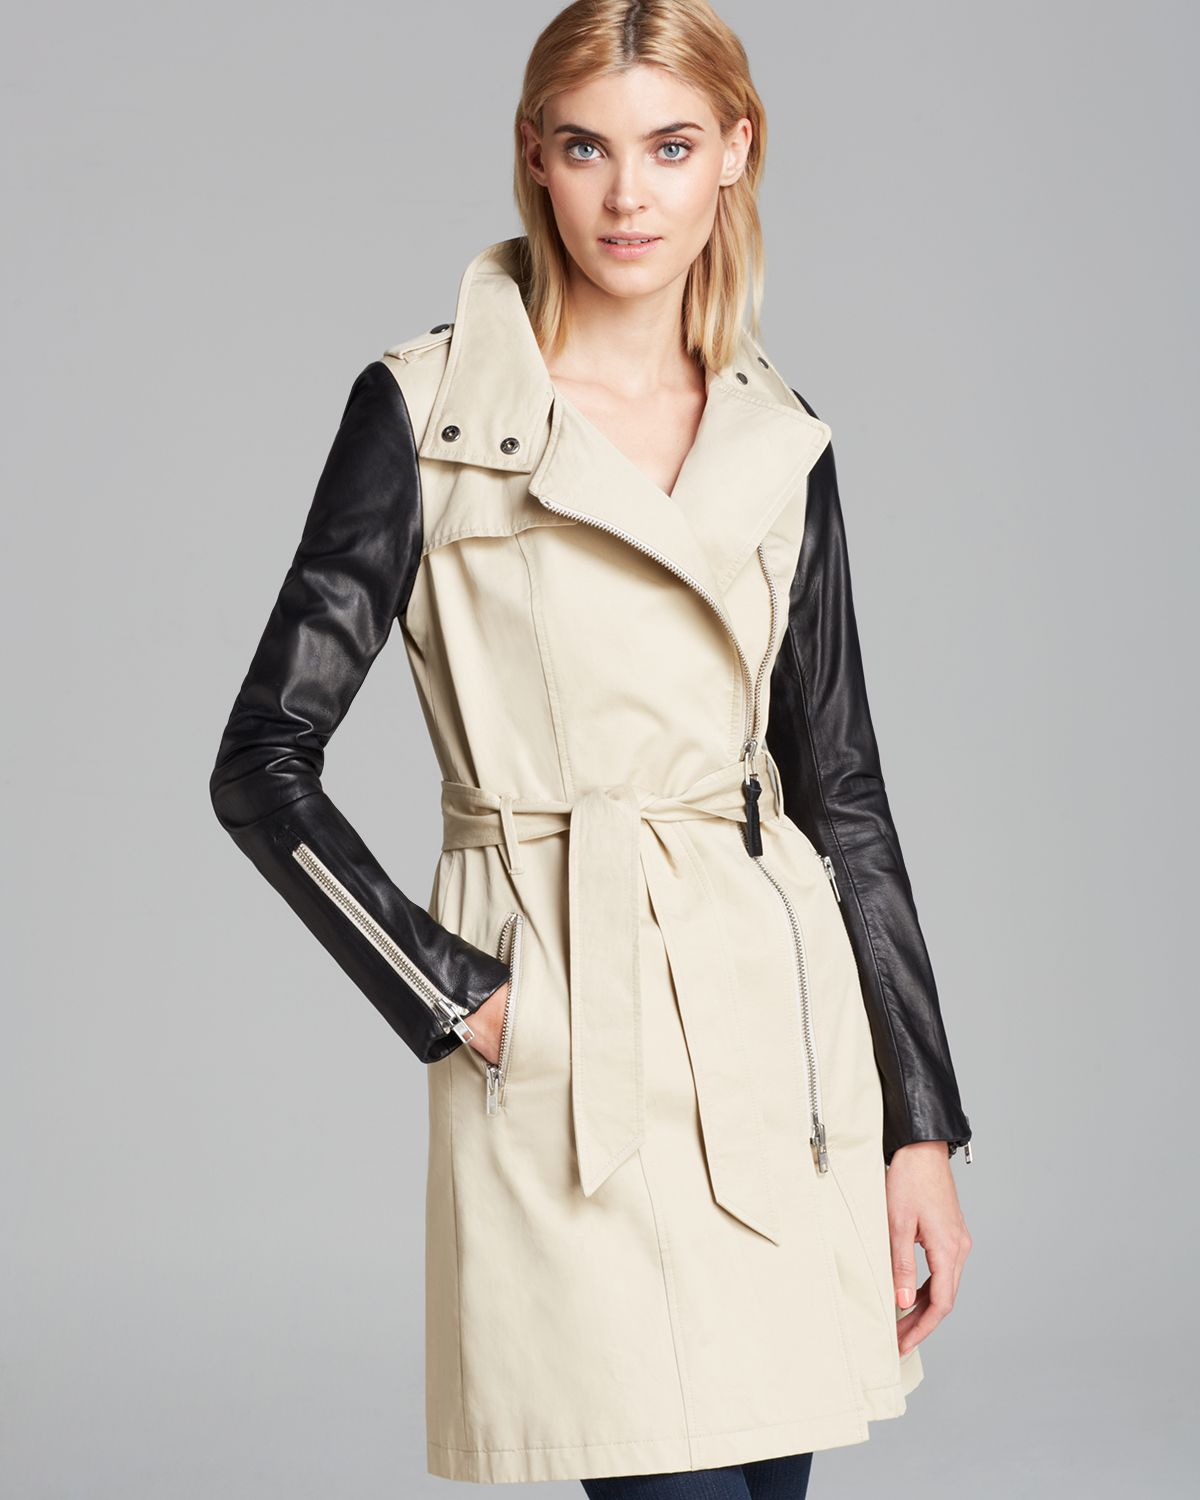 Mackage Trench Coat Avra Mixed Media in Beige (Natural) - Lyst